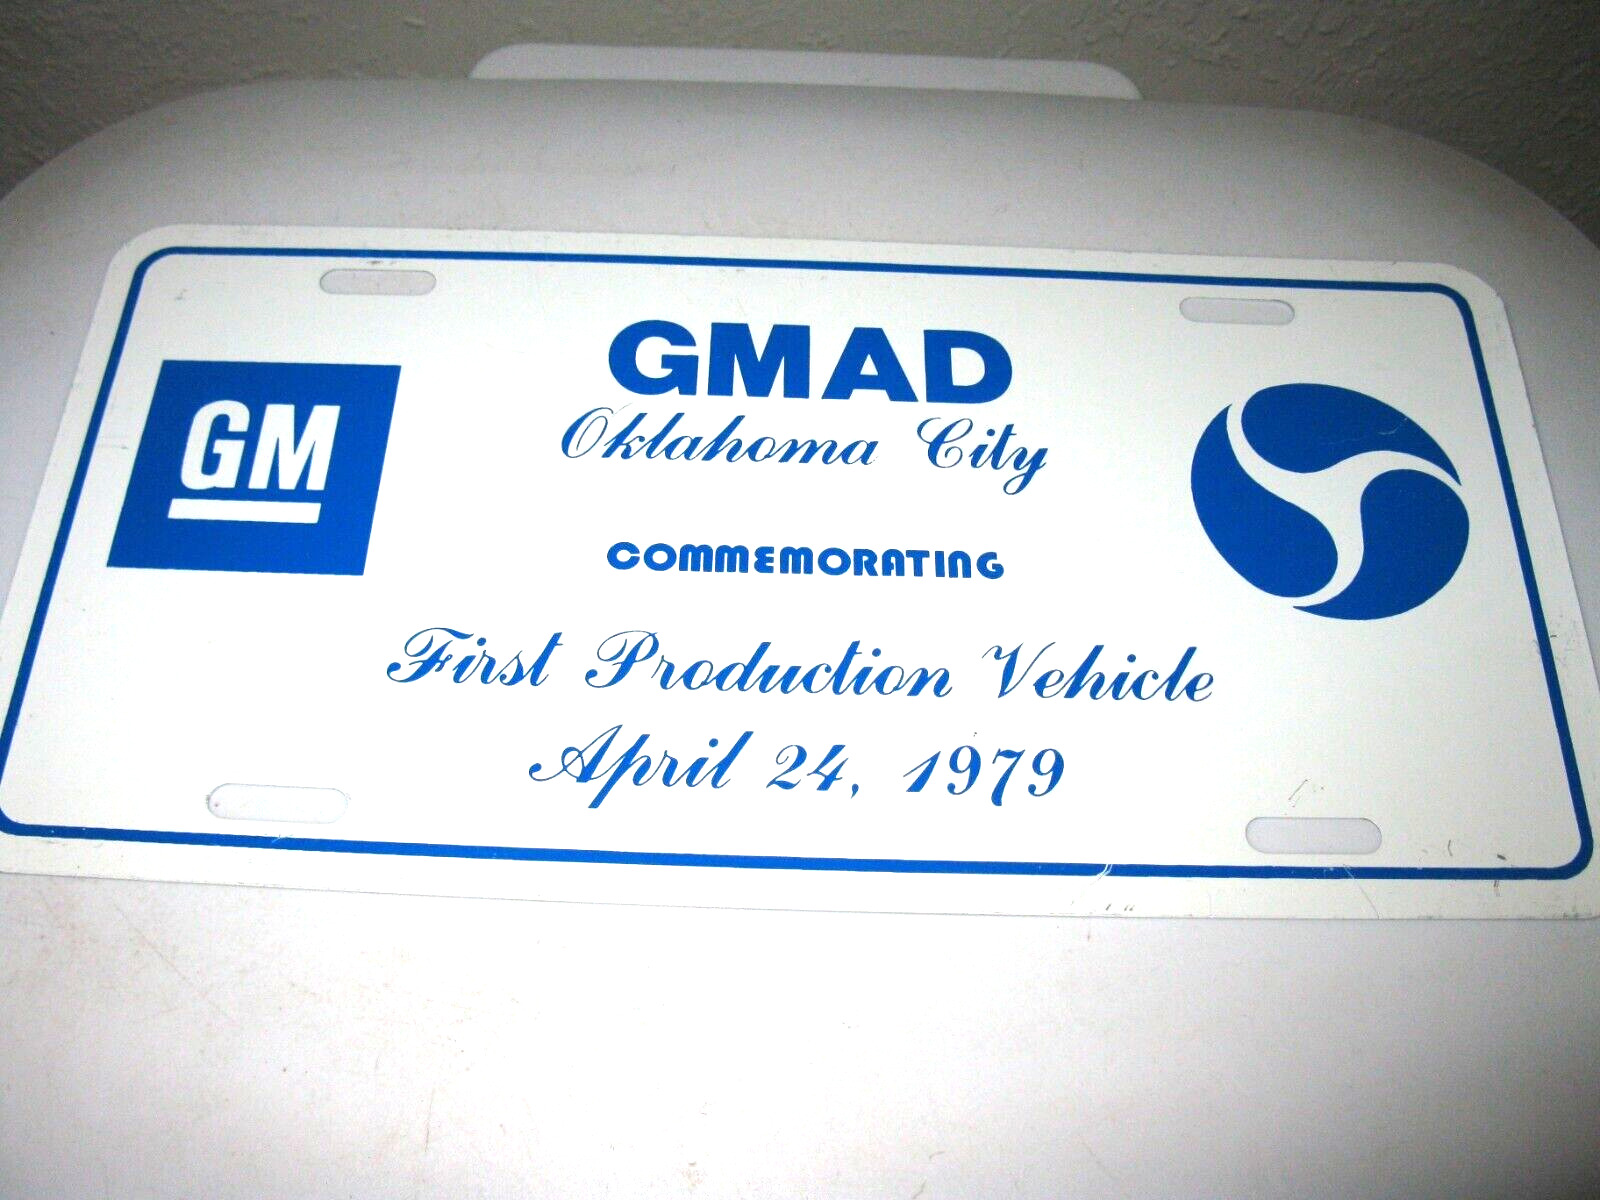 General Motors GMAD Oklahoma City License Plate First Production Vehicle 1979